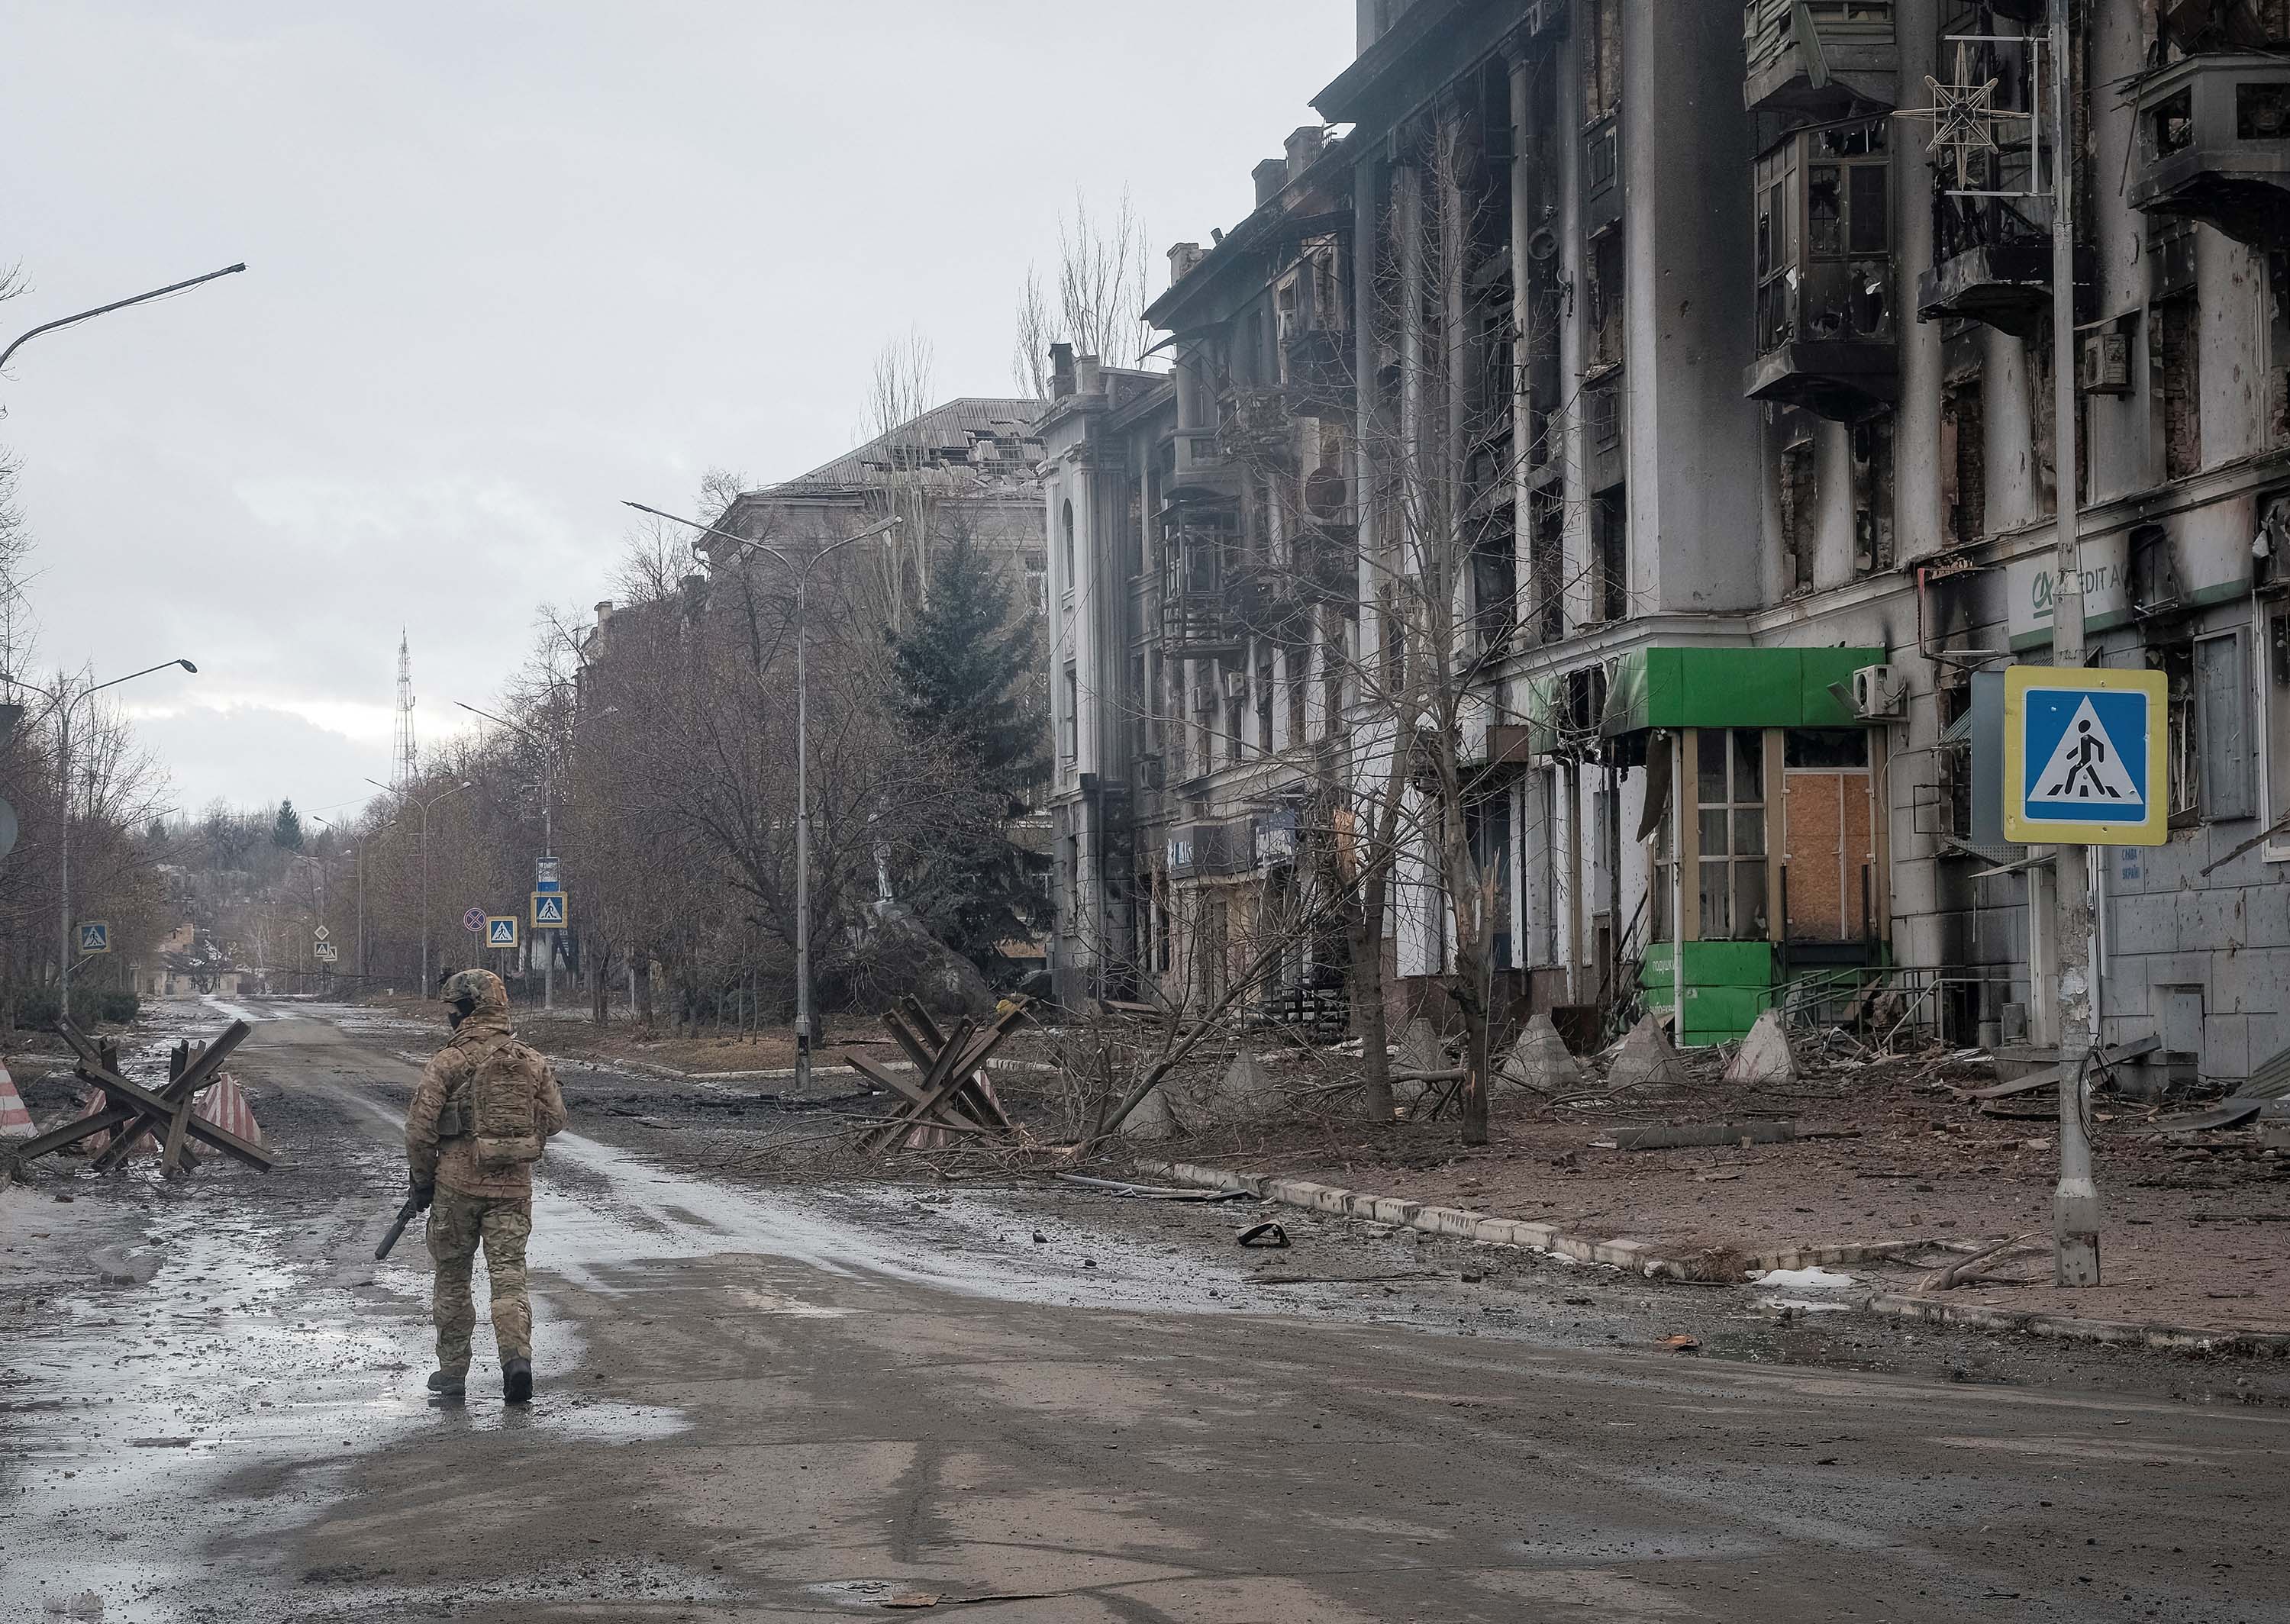 Situation in Bakhmut is “much worse than officially reported,” Ukrainian soldiers say